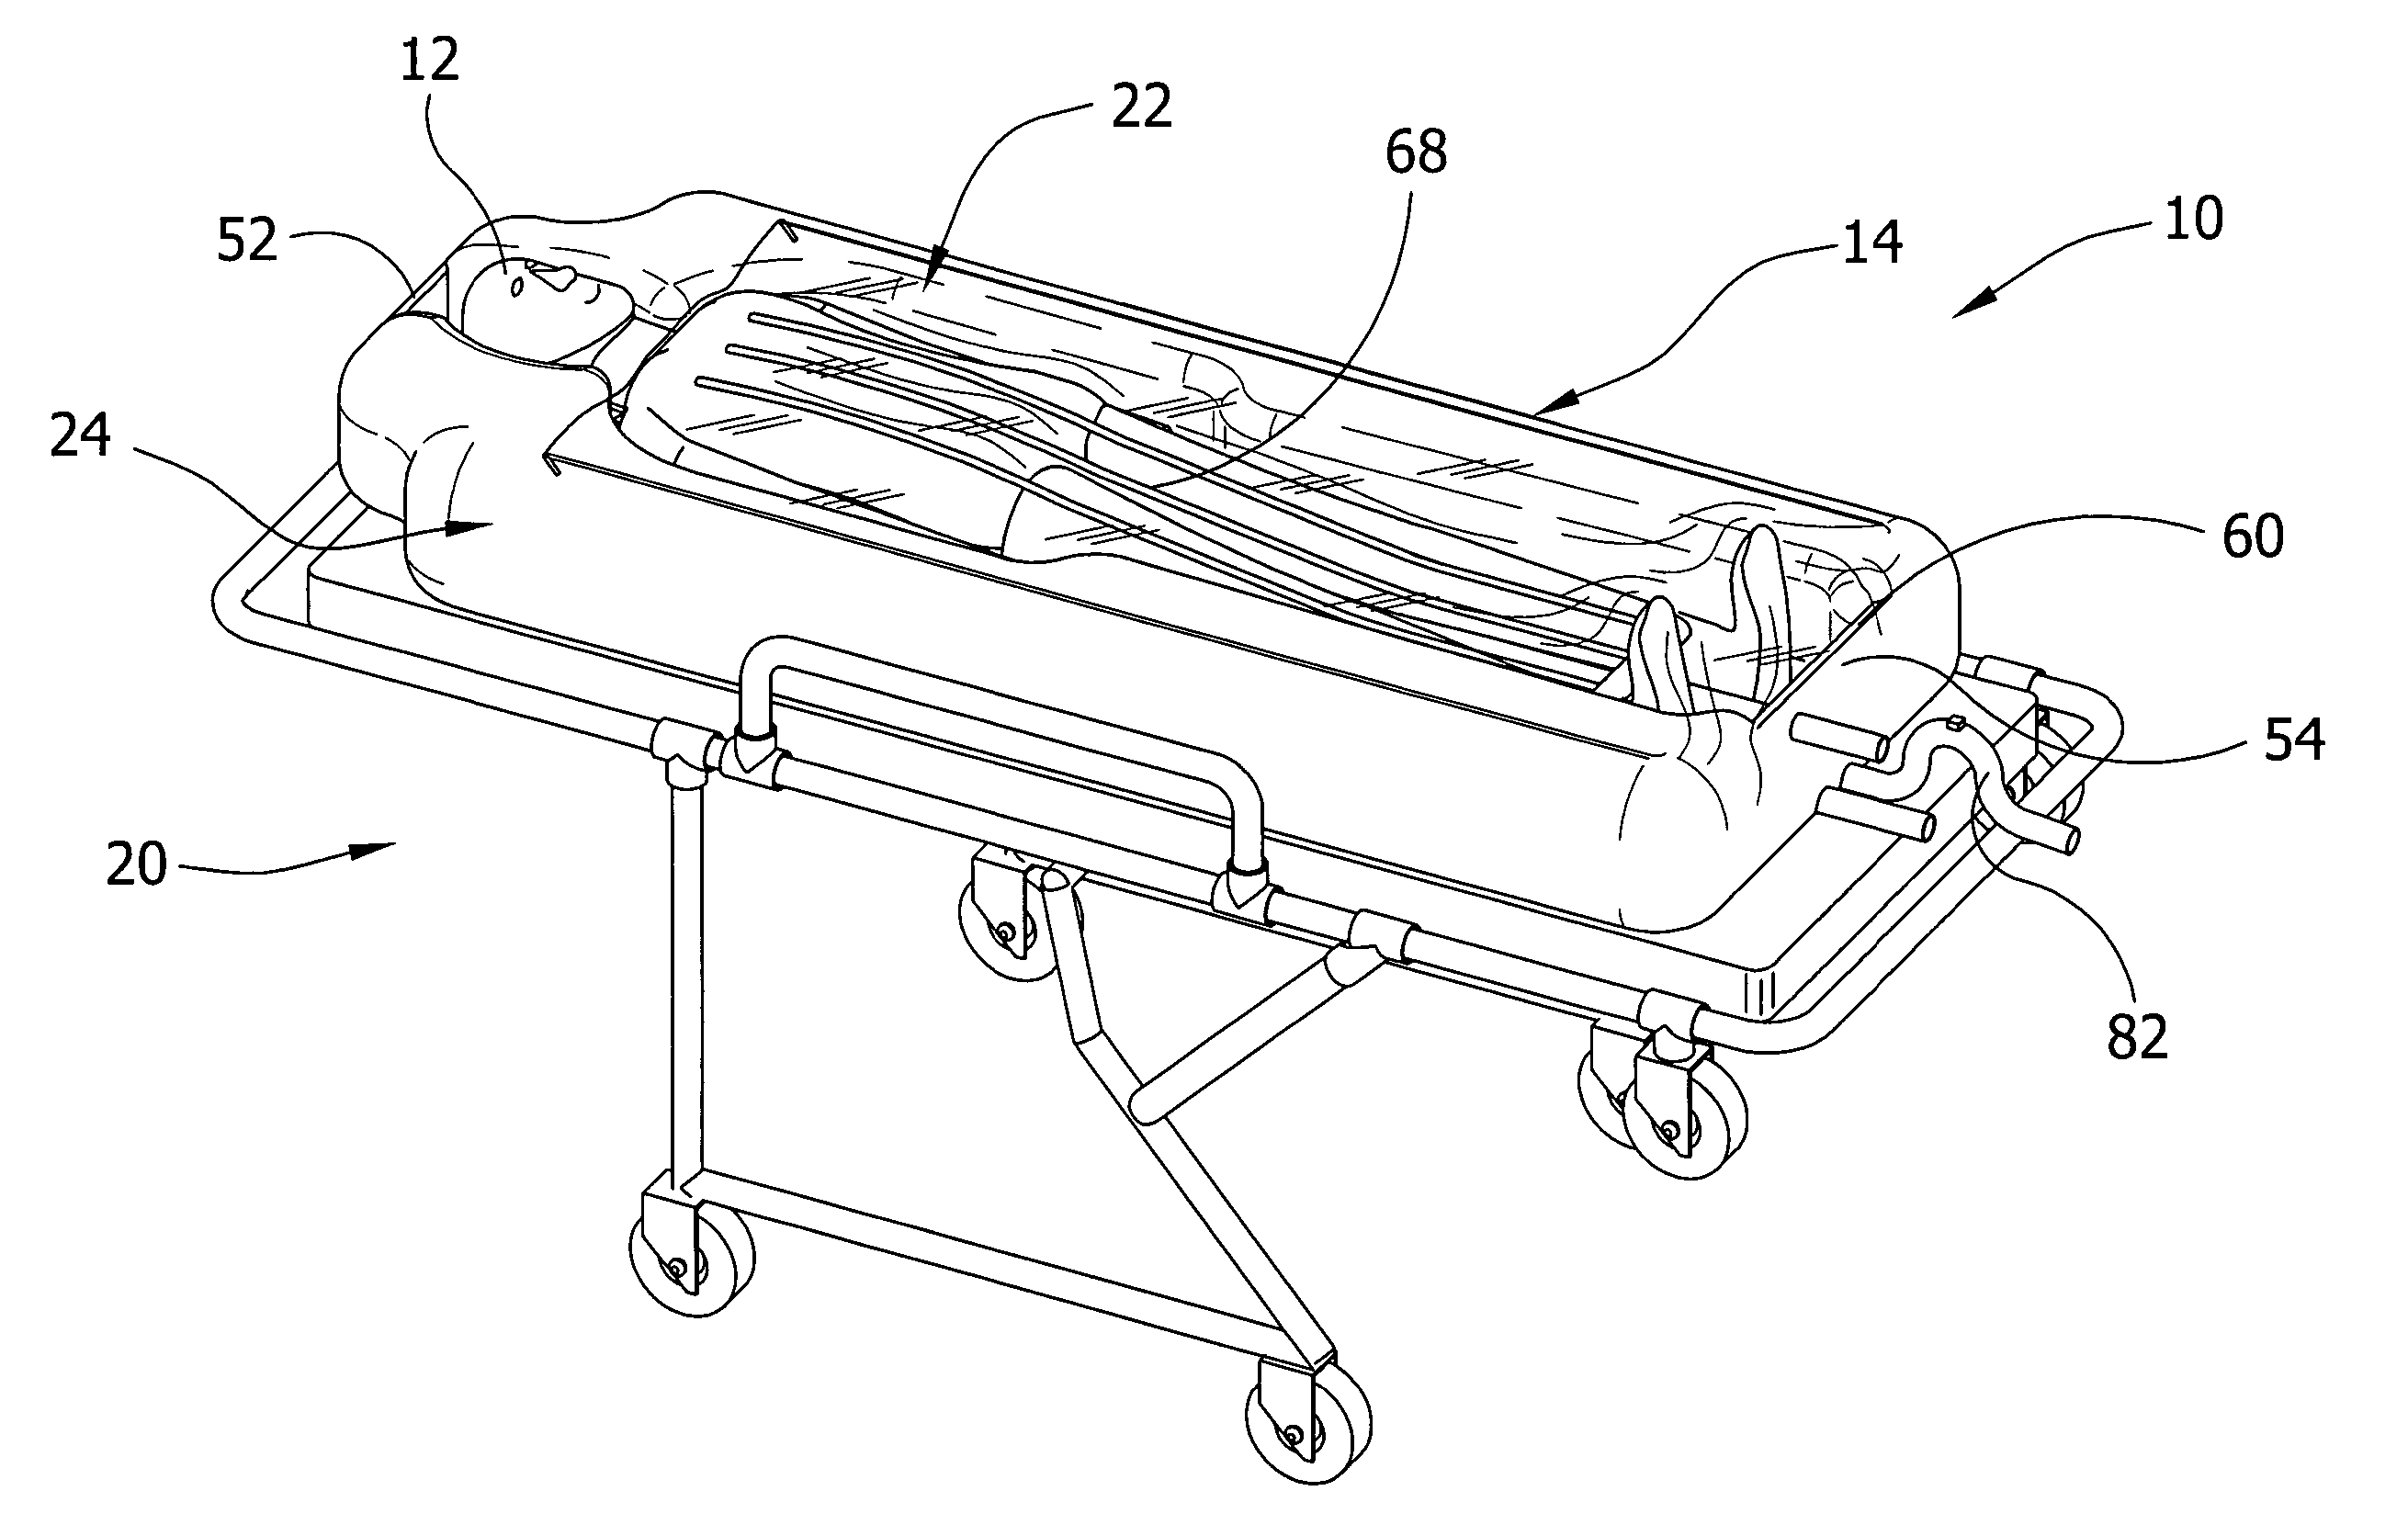 Apparatus for altering the body temperature of a patient